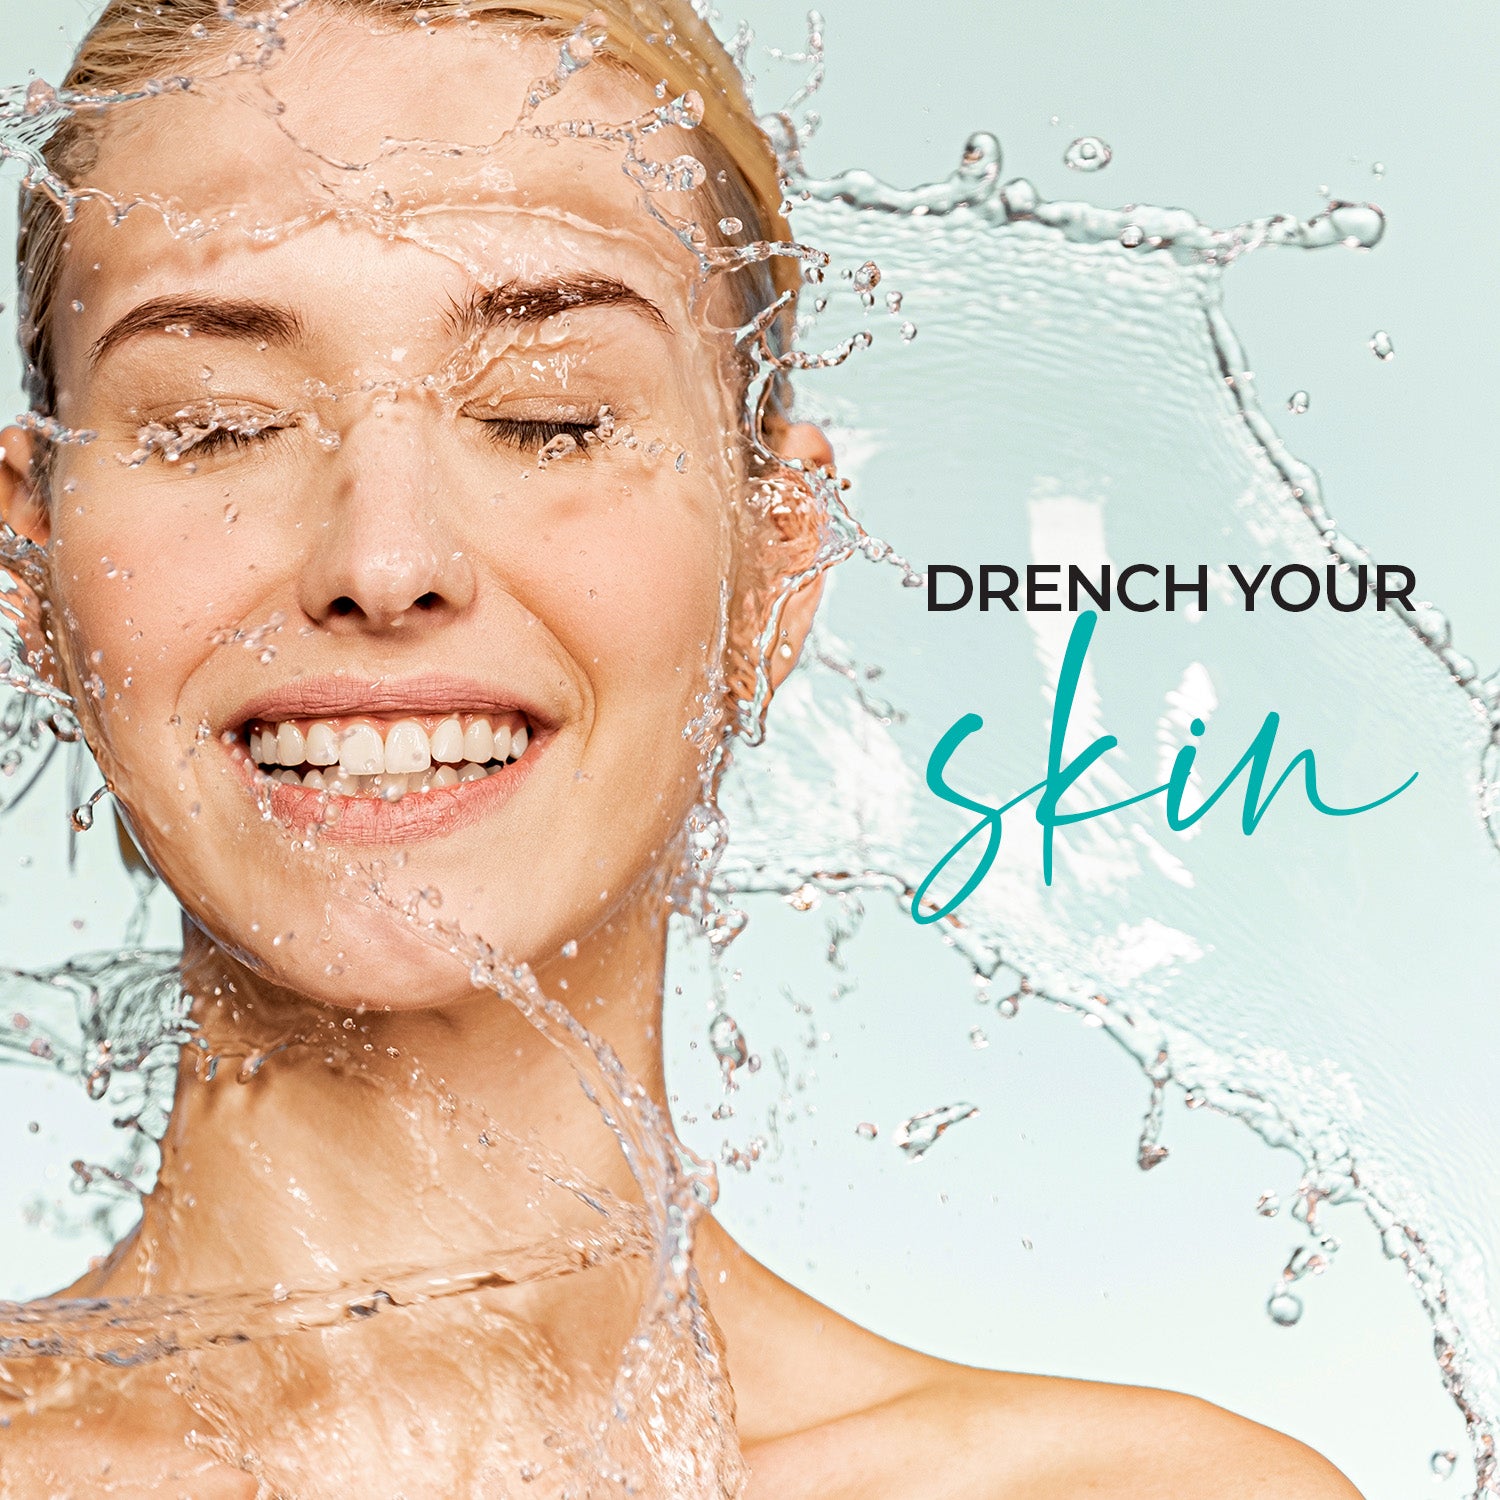 Splash Into Summer with the Hydration of Hyaluronic Acid